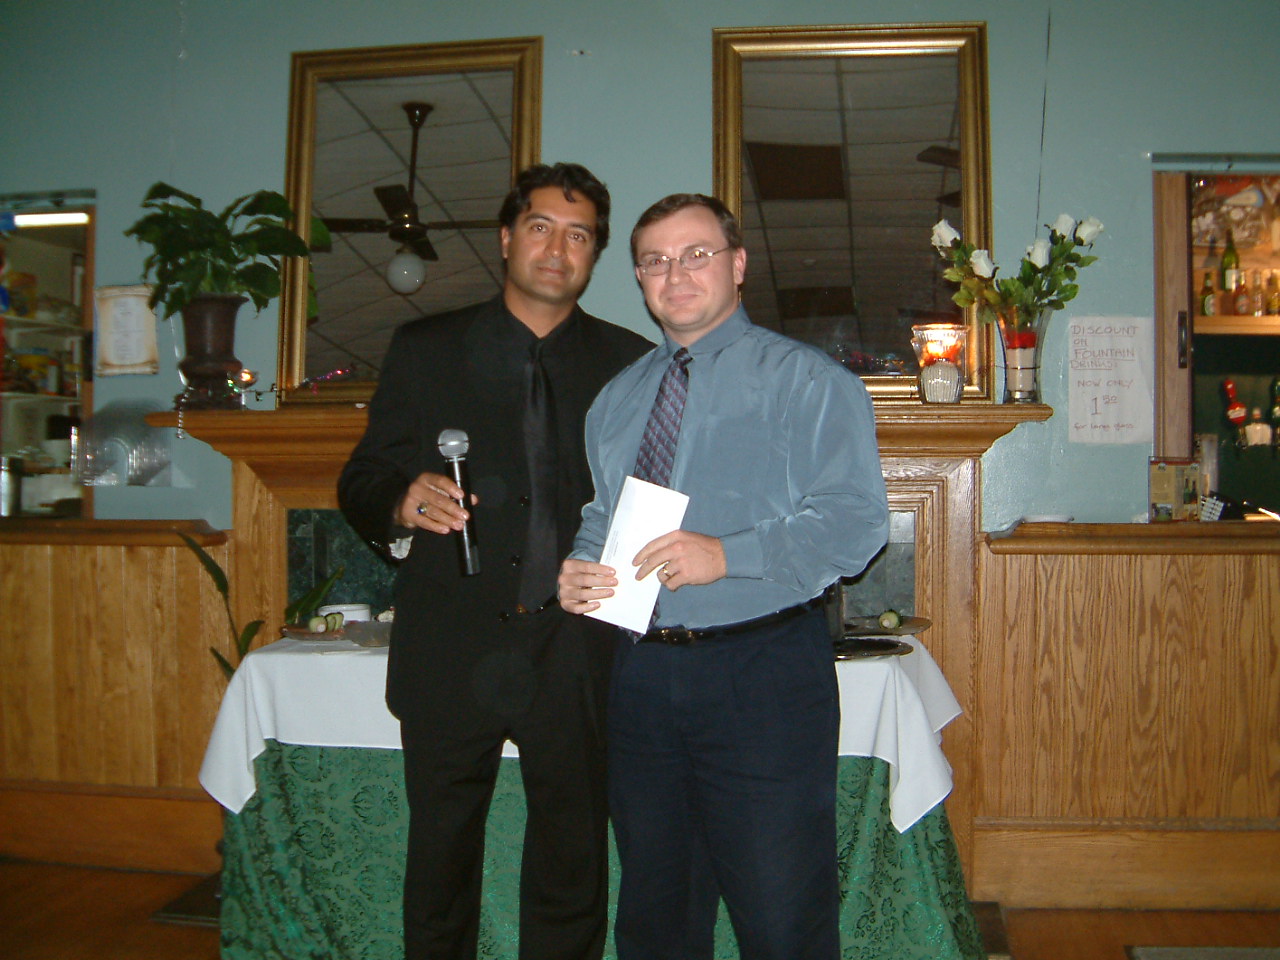 Imran presenting a cheque to Michel from Search and Rescue in 2004.